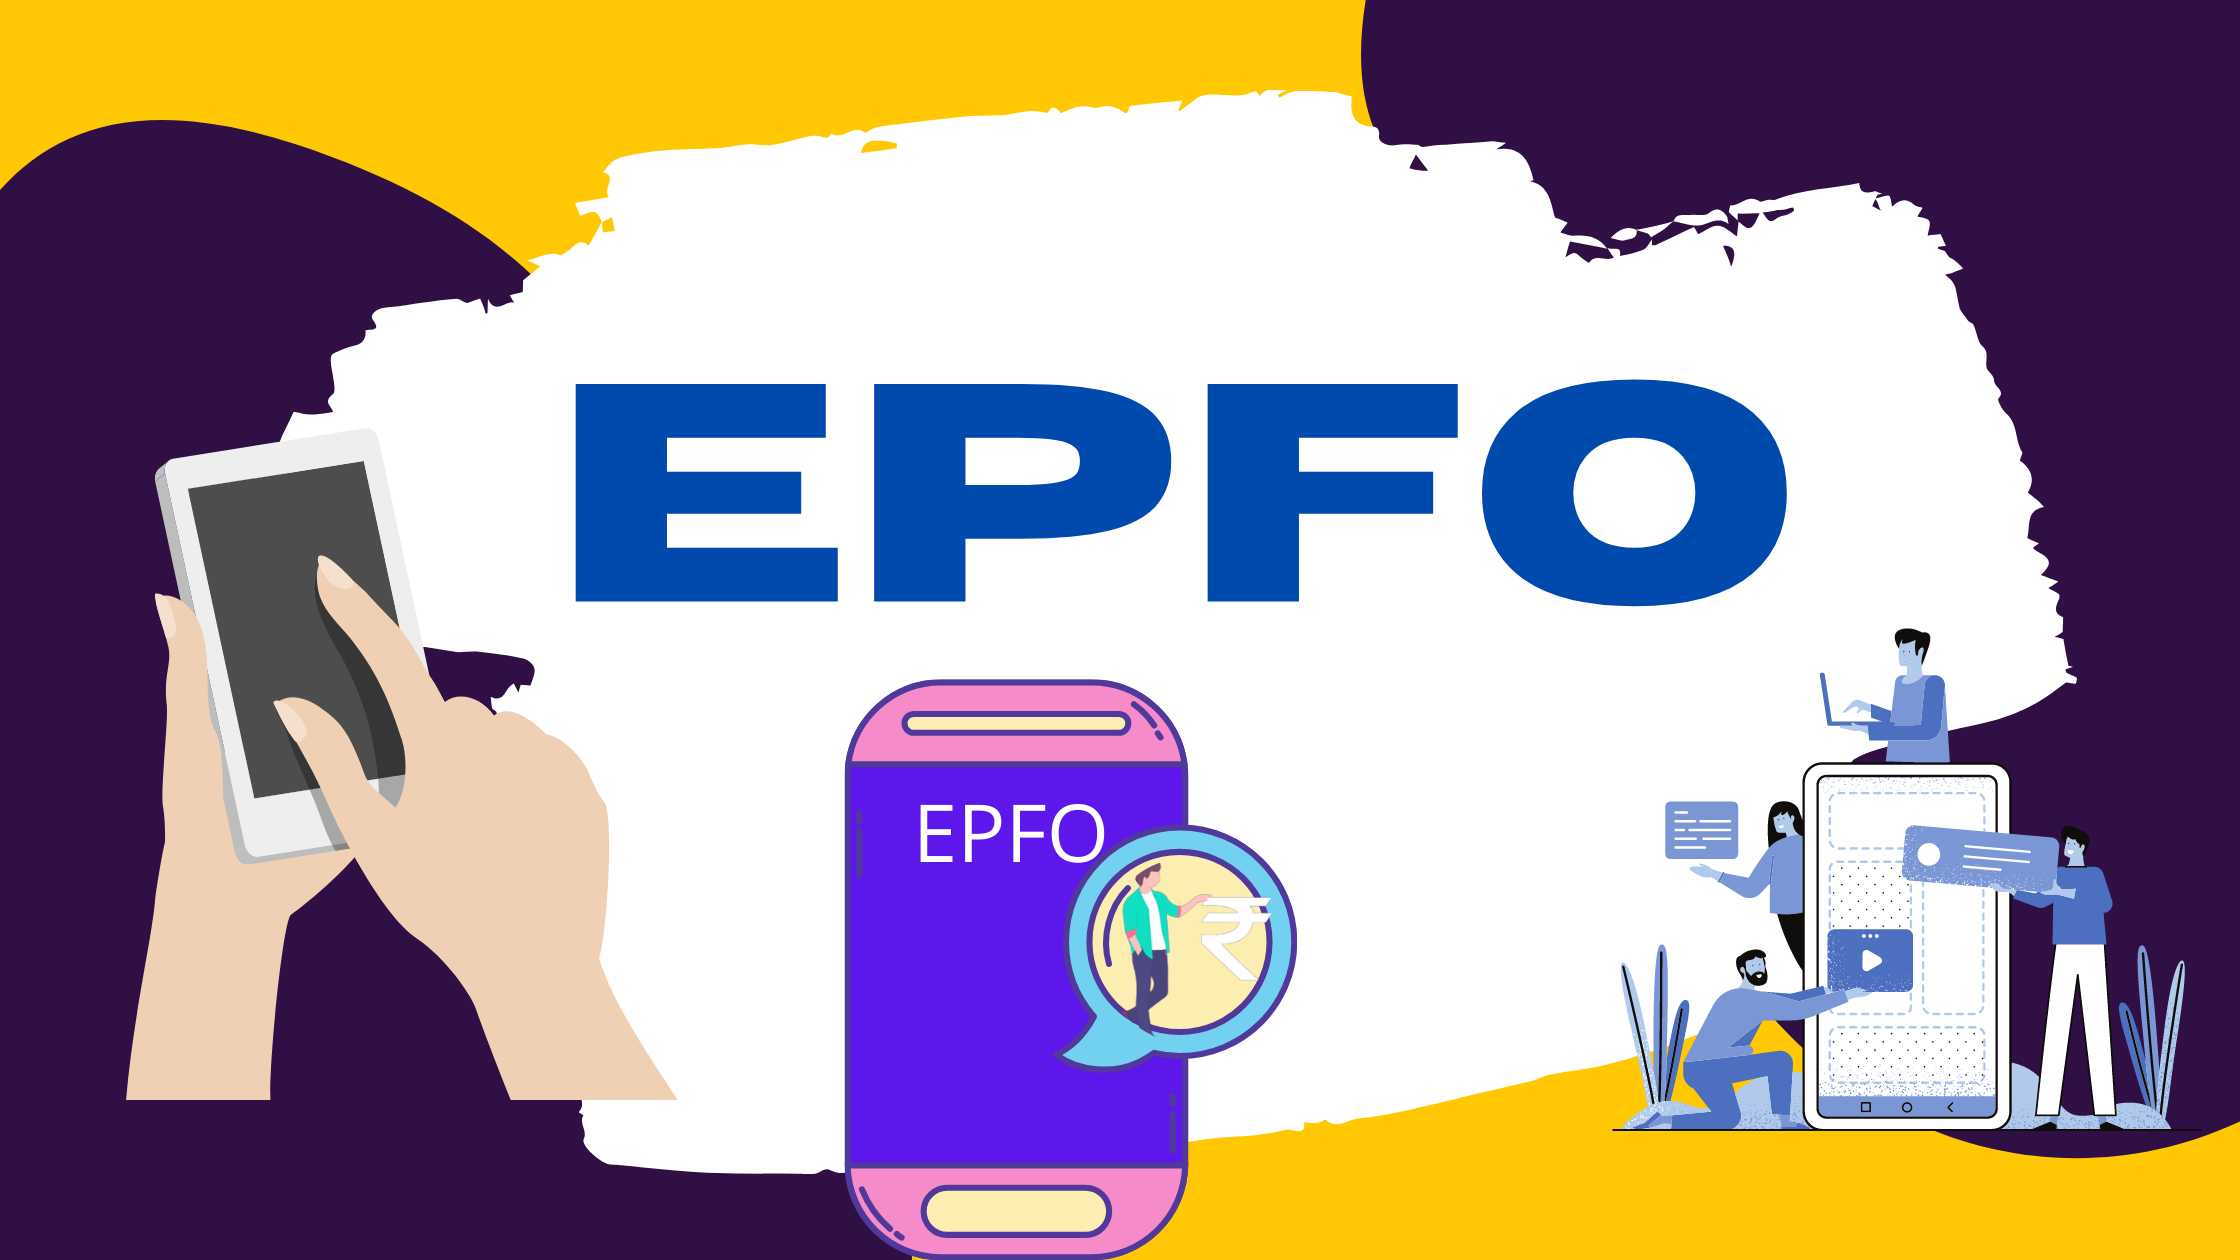 EPFO Adds 14012 Lakh Net Subscriber in February 2022